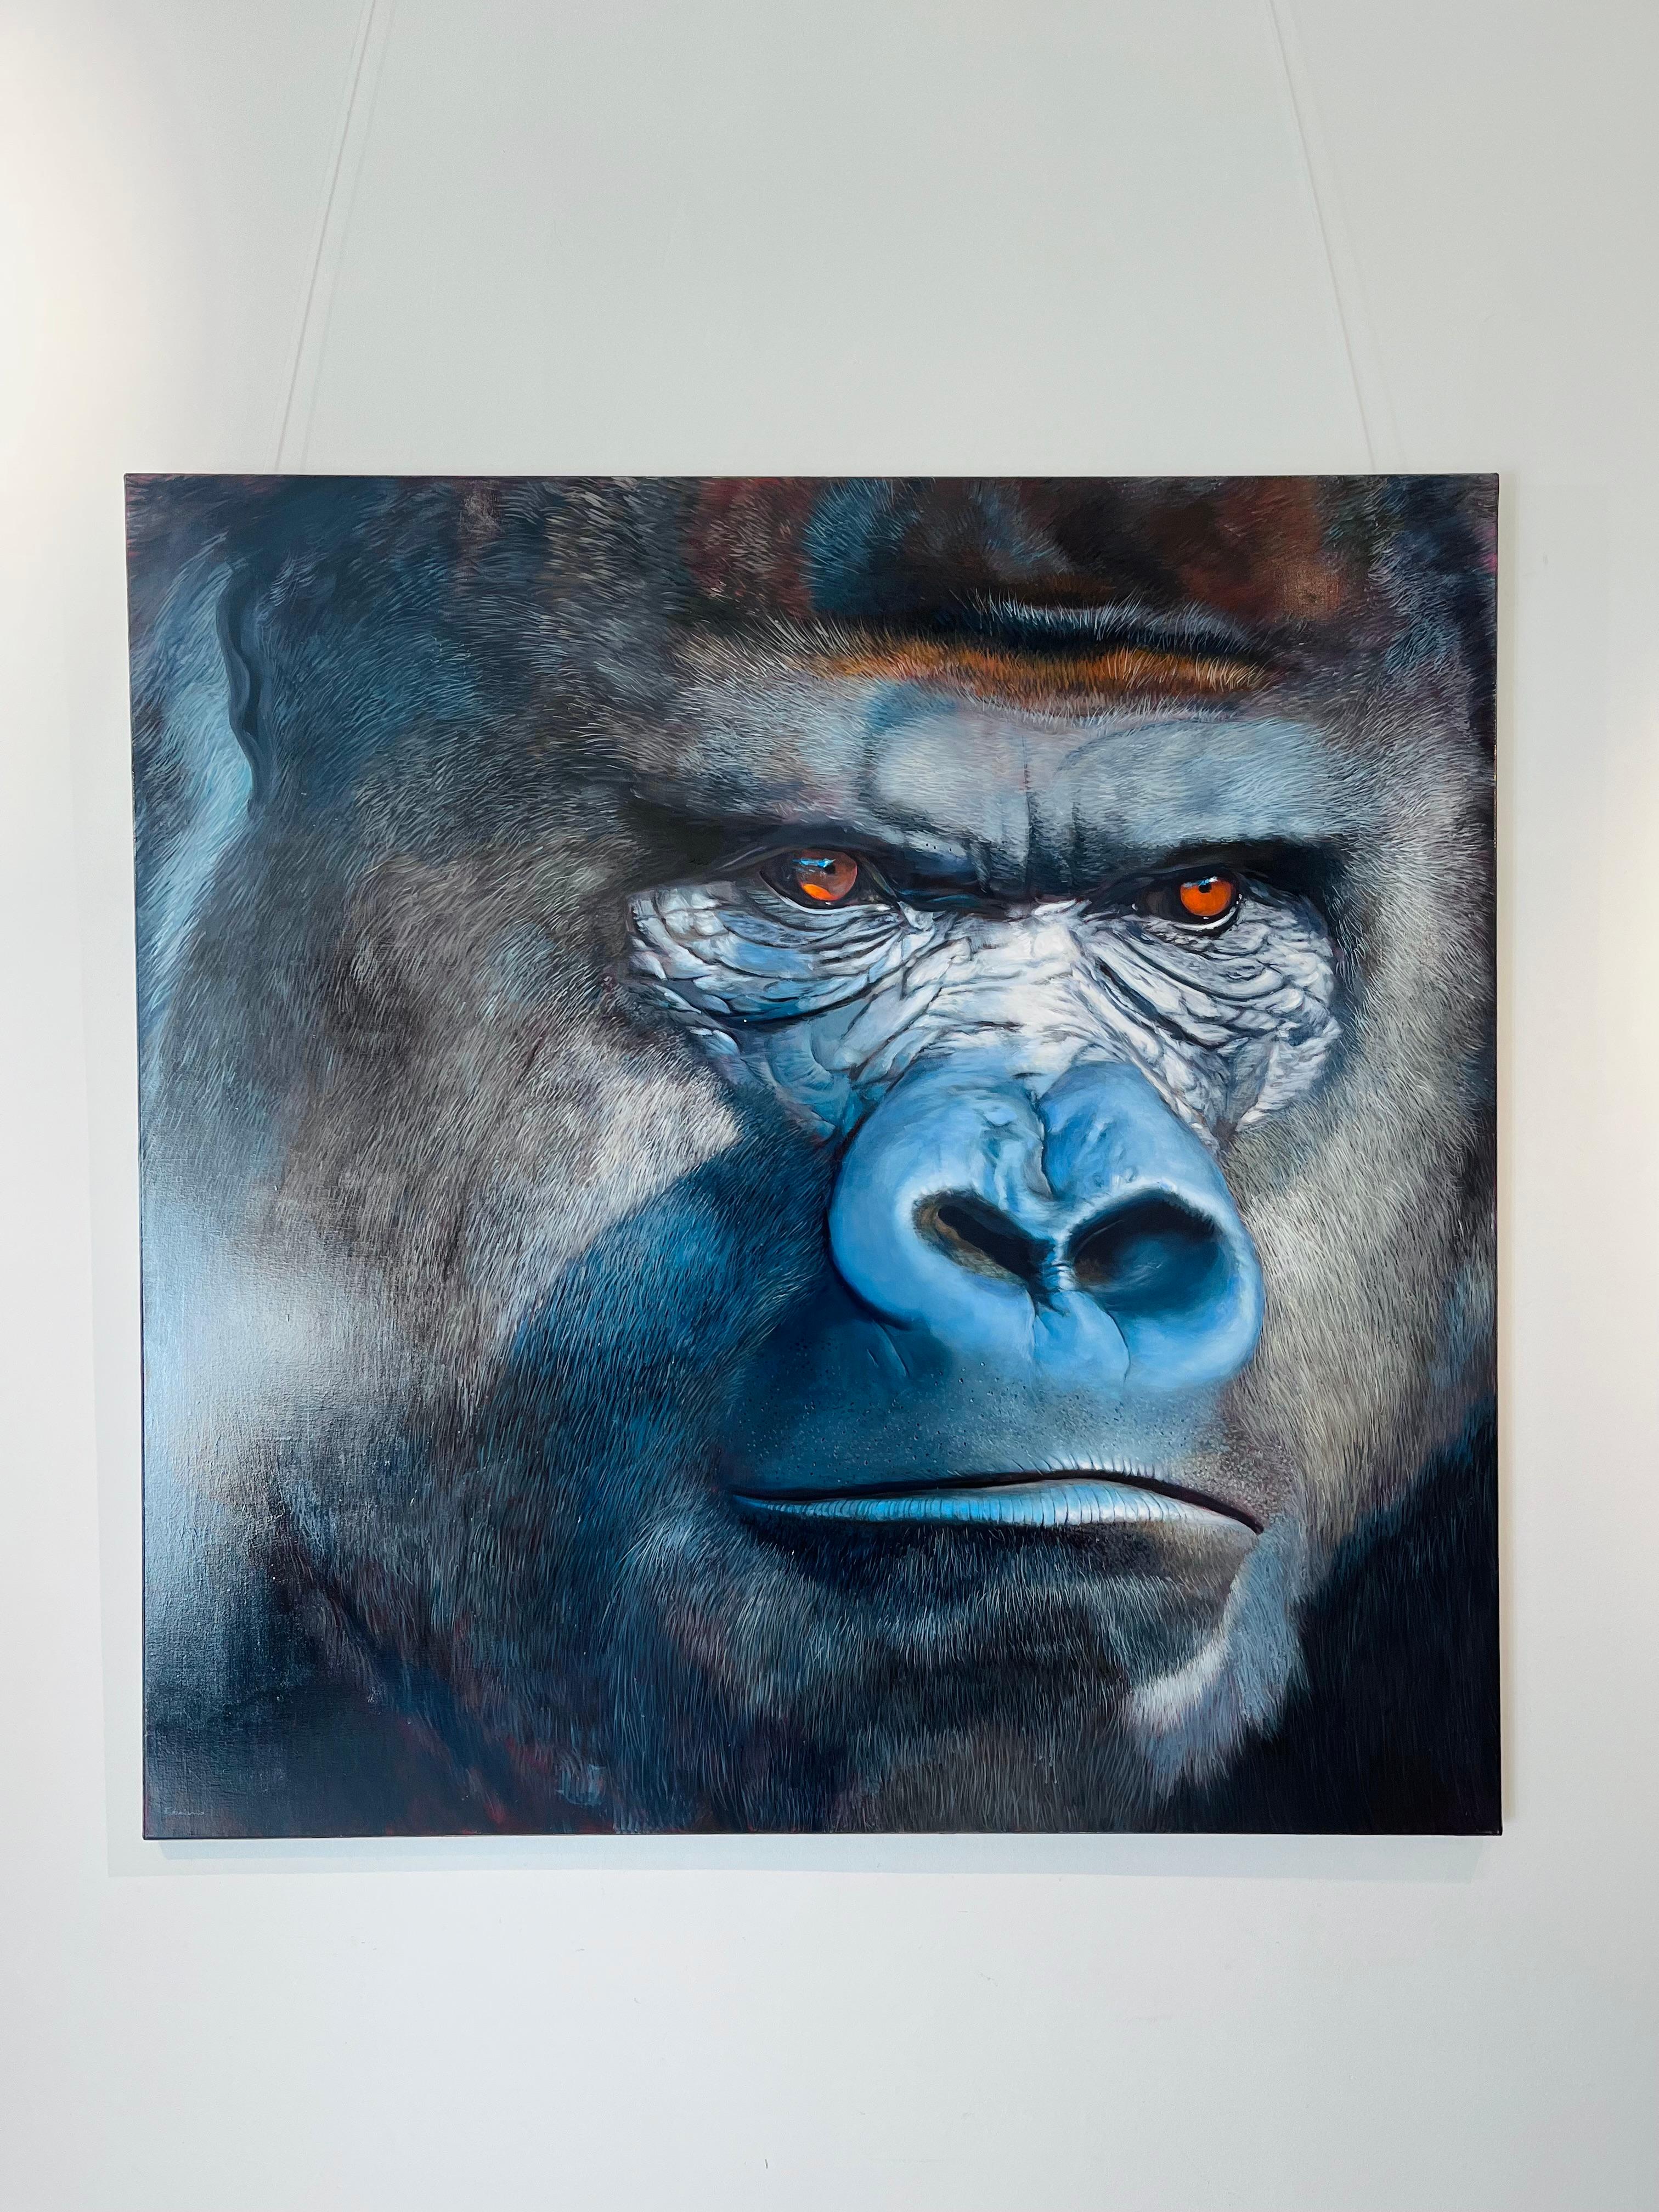 Gorilla-original hyper realism wildlife oil painting-artwork- contemporary Art - Painting by Fabriano